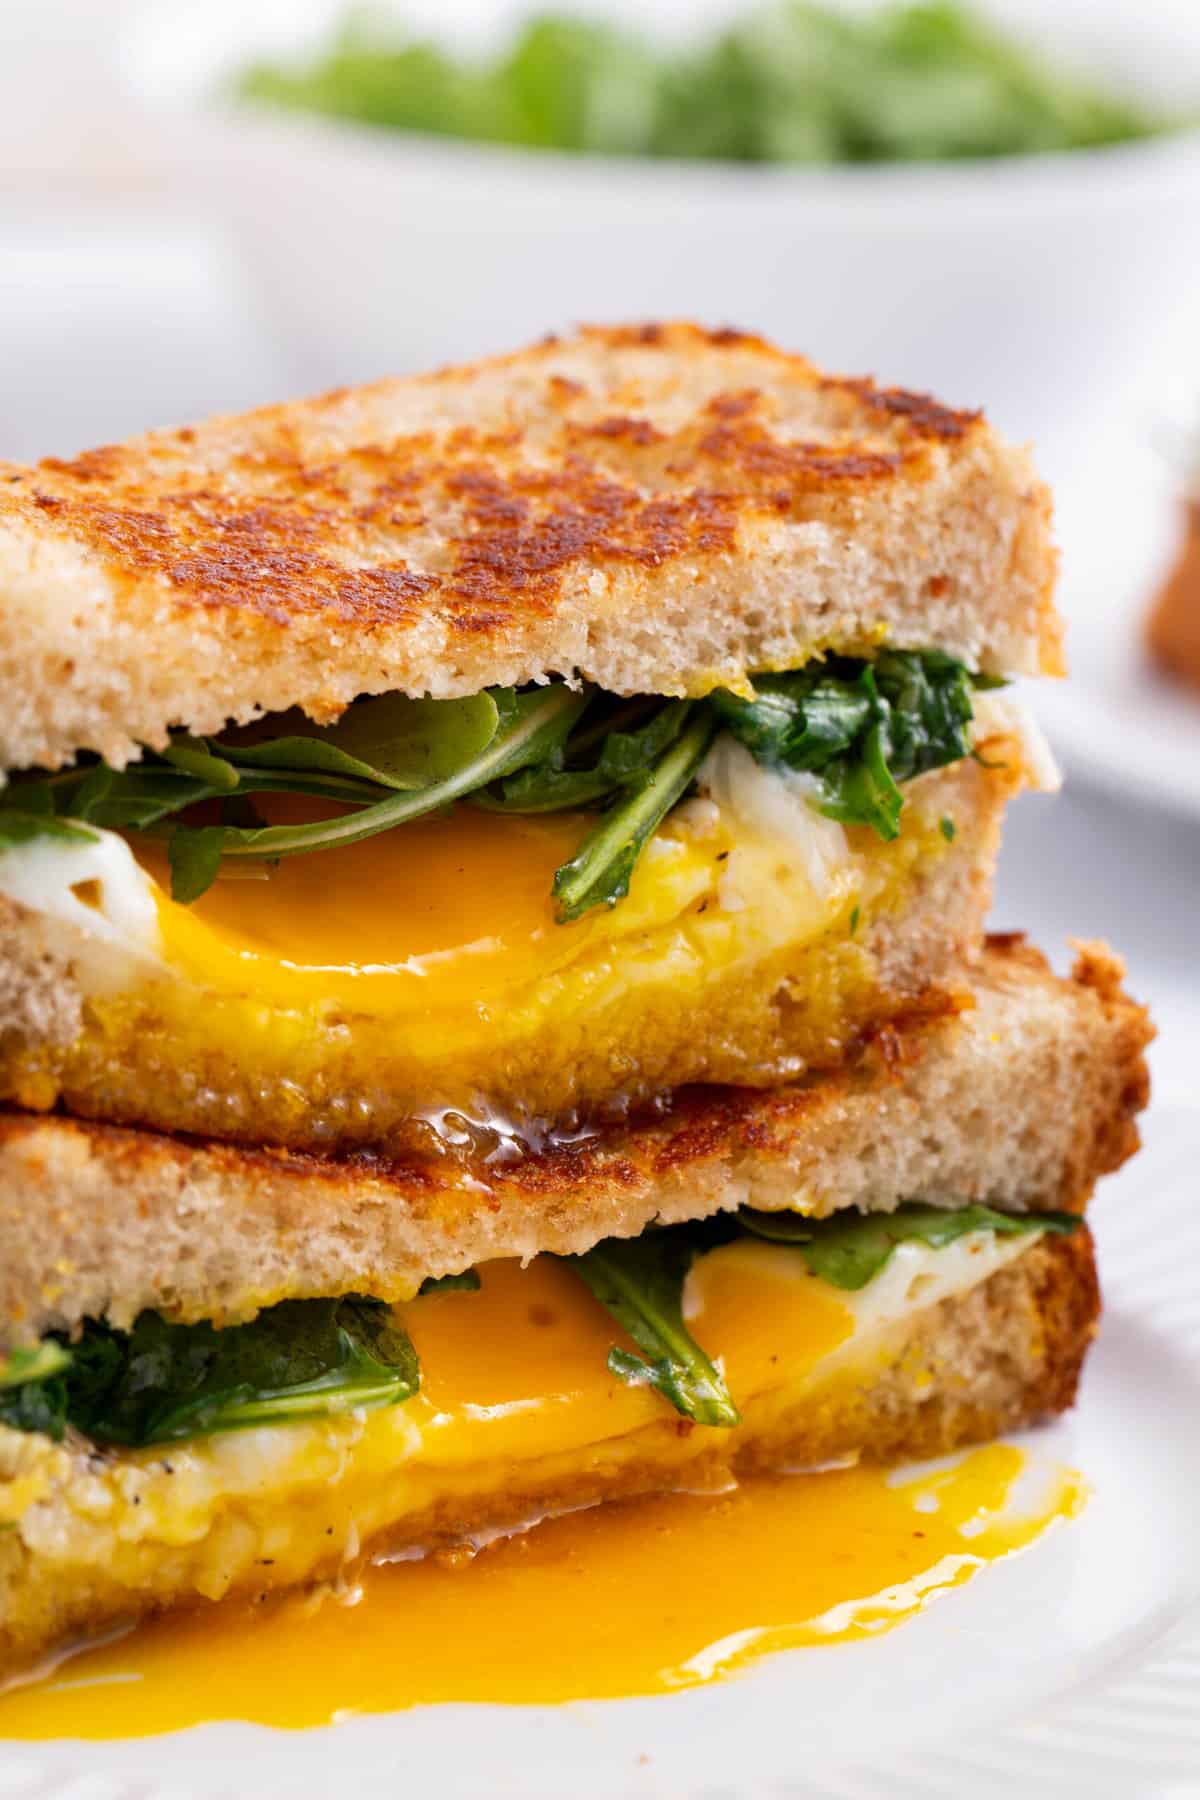 close up image of the cross section of a fried egg and cheese sandwich served on a white round plate